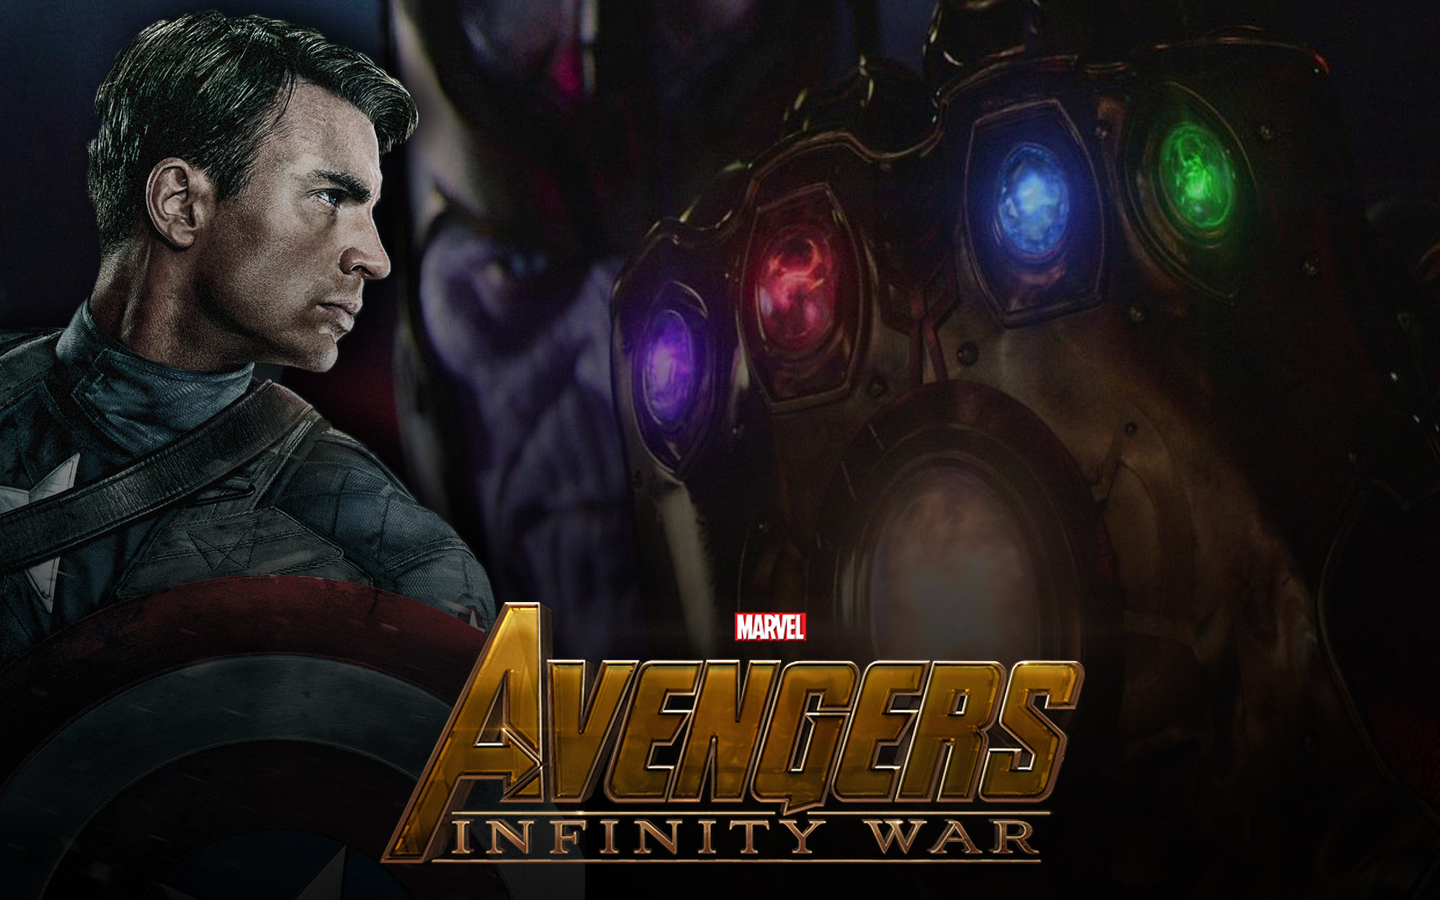 This Just In: Reported Synopsis for ‘Avengers: Infinity War’